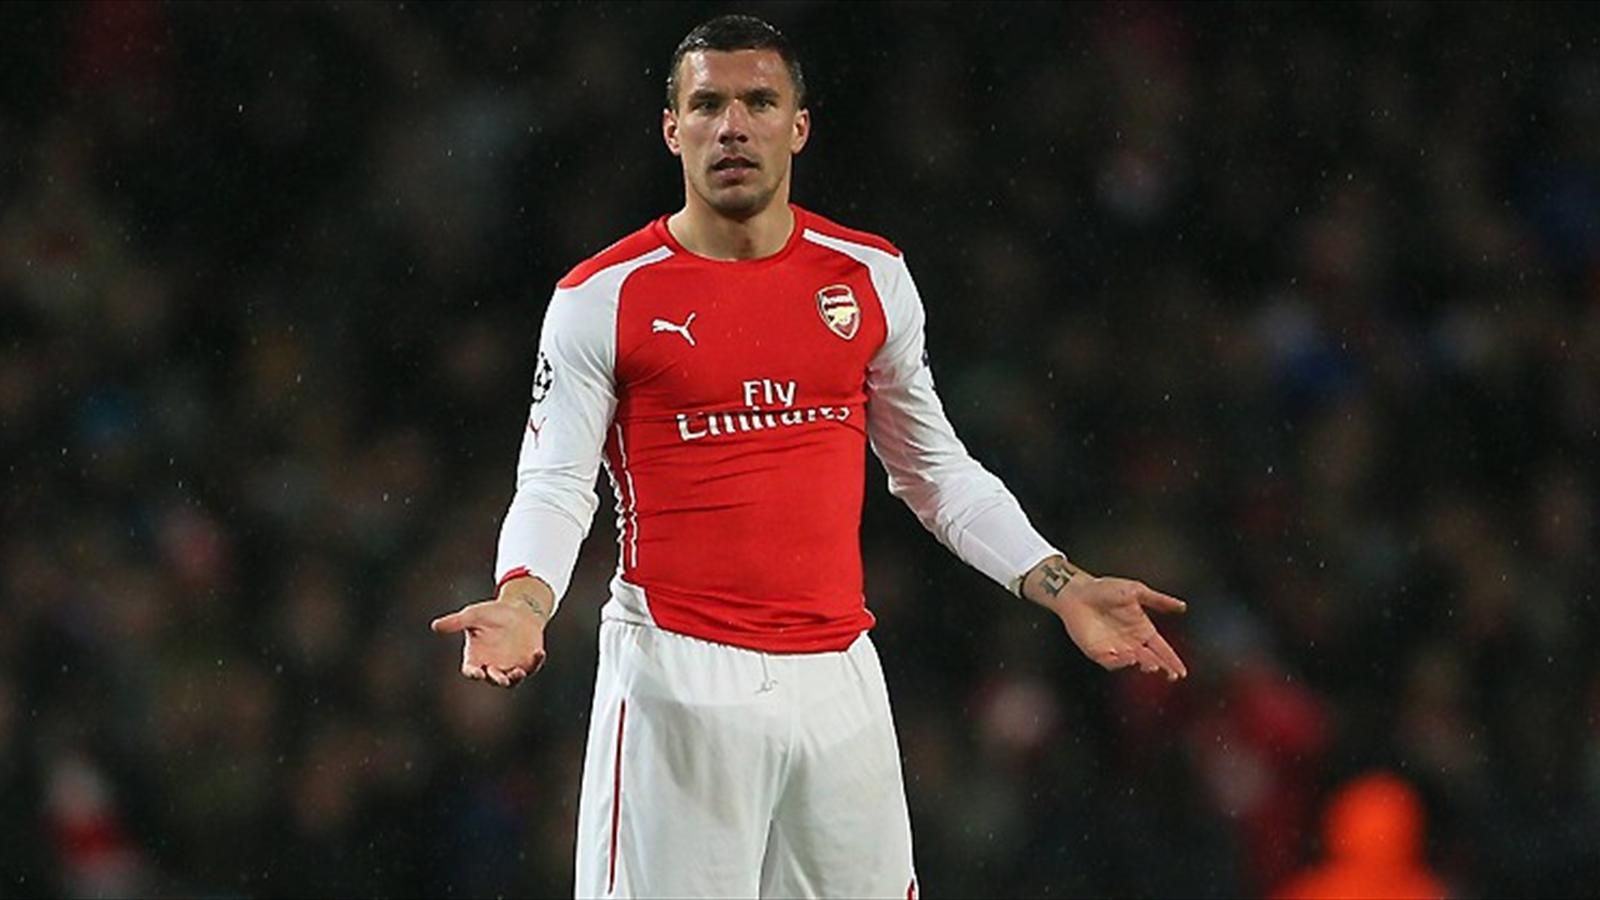 Podolski - Arsenal will fit very well with me